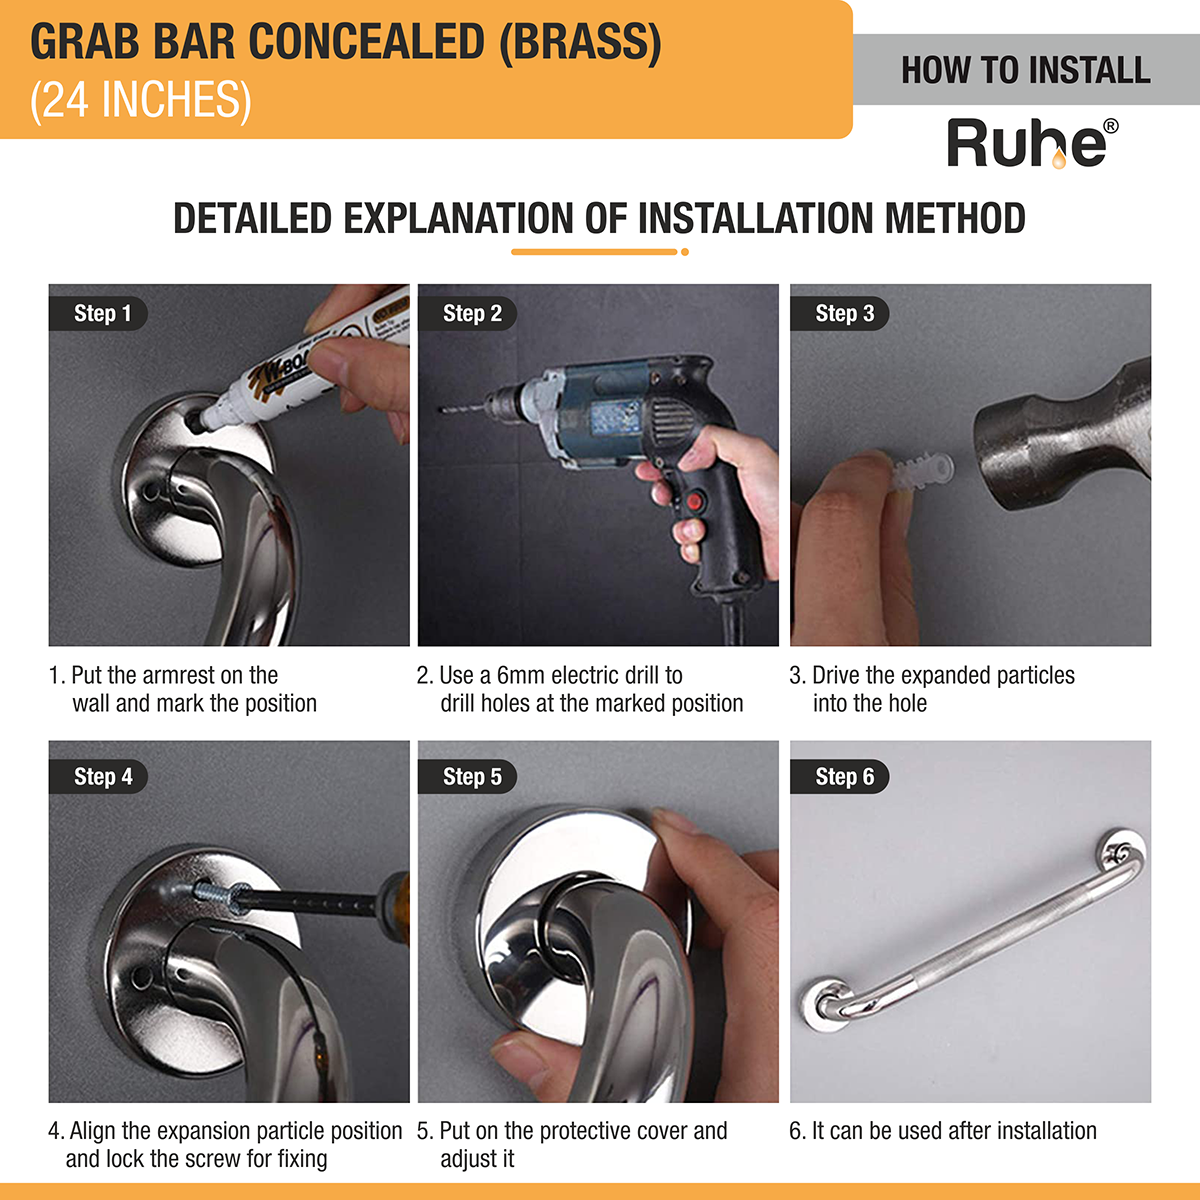 Brass Grab Bar Concealed (24 inches) installation process